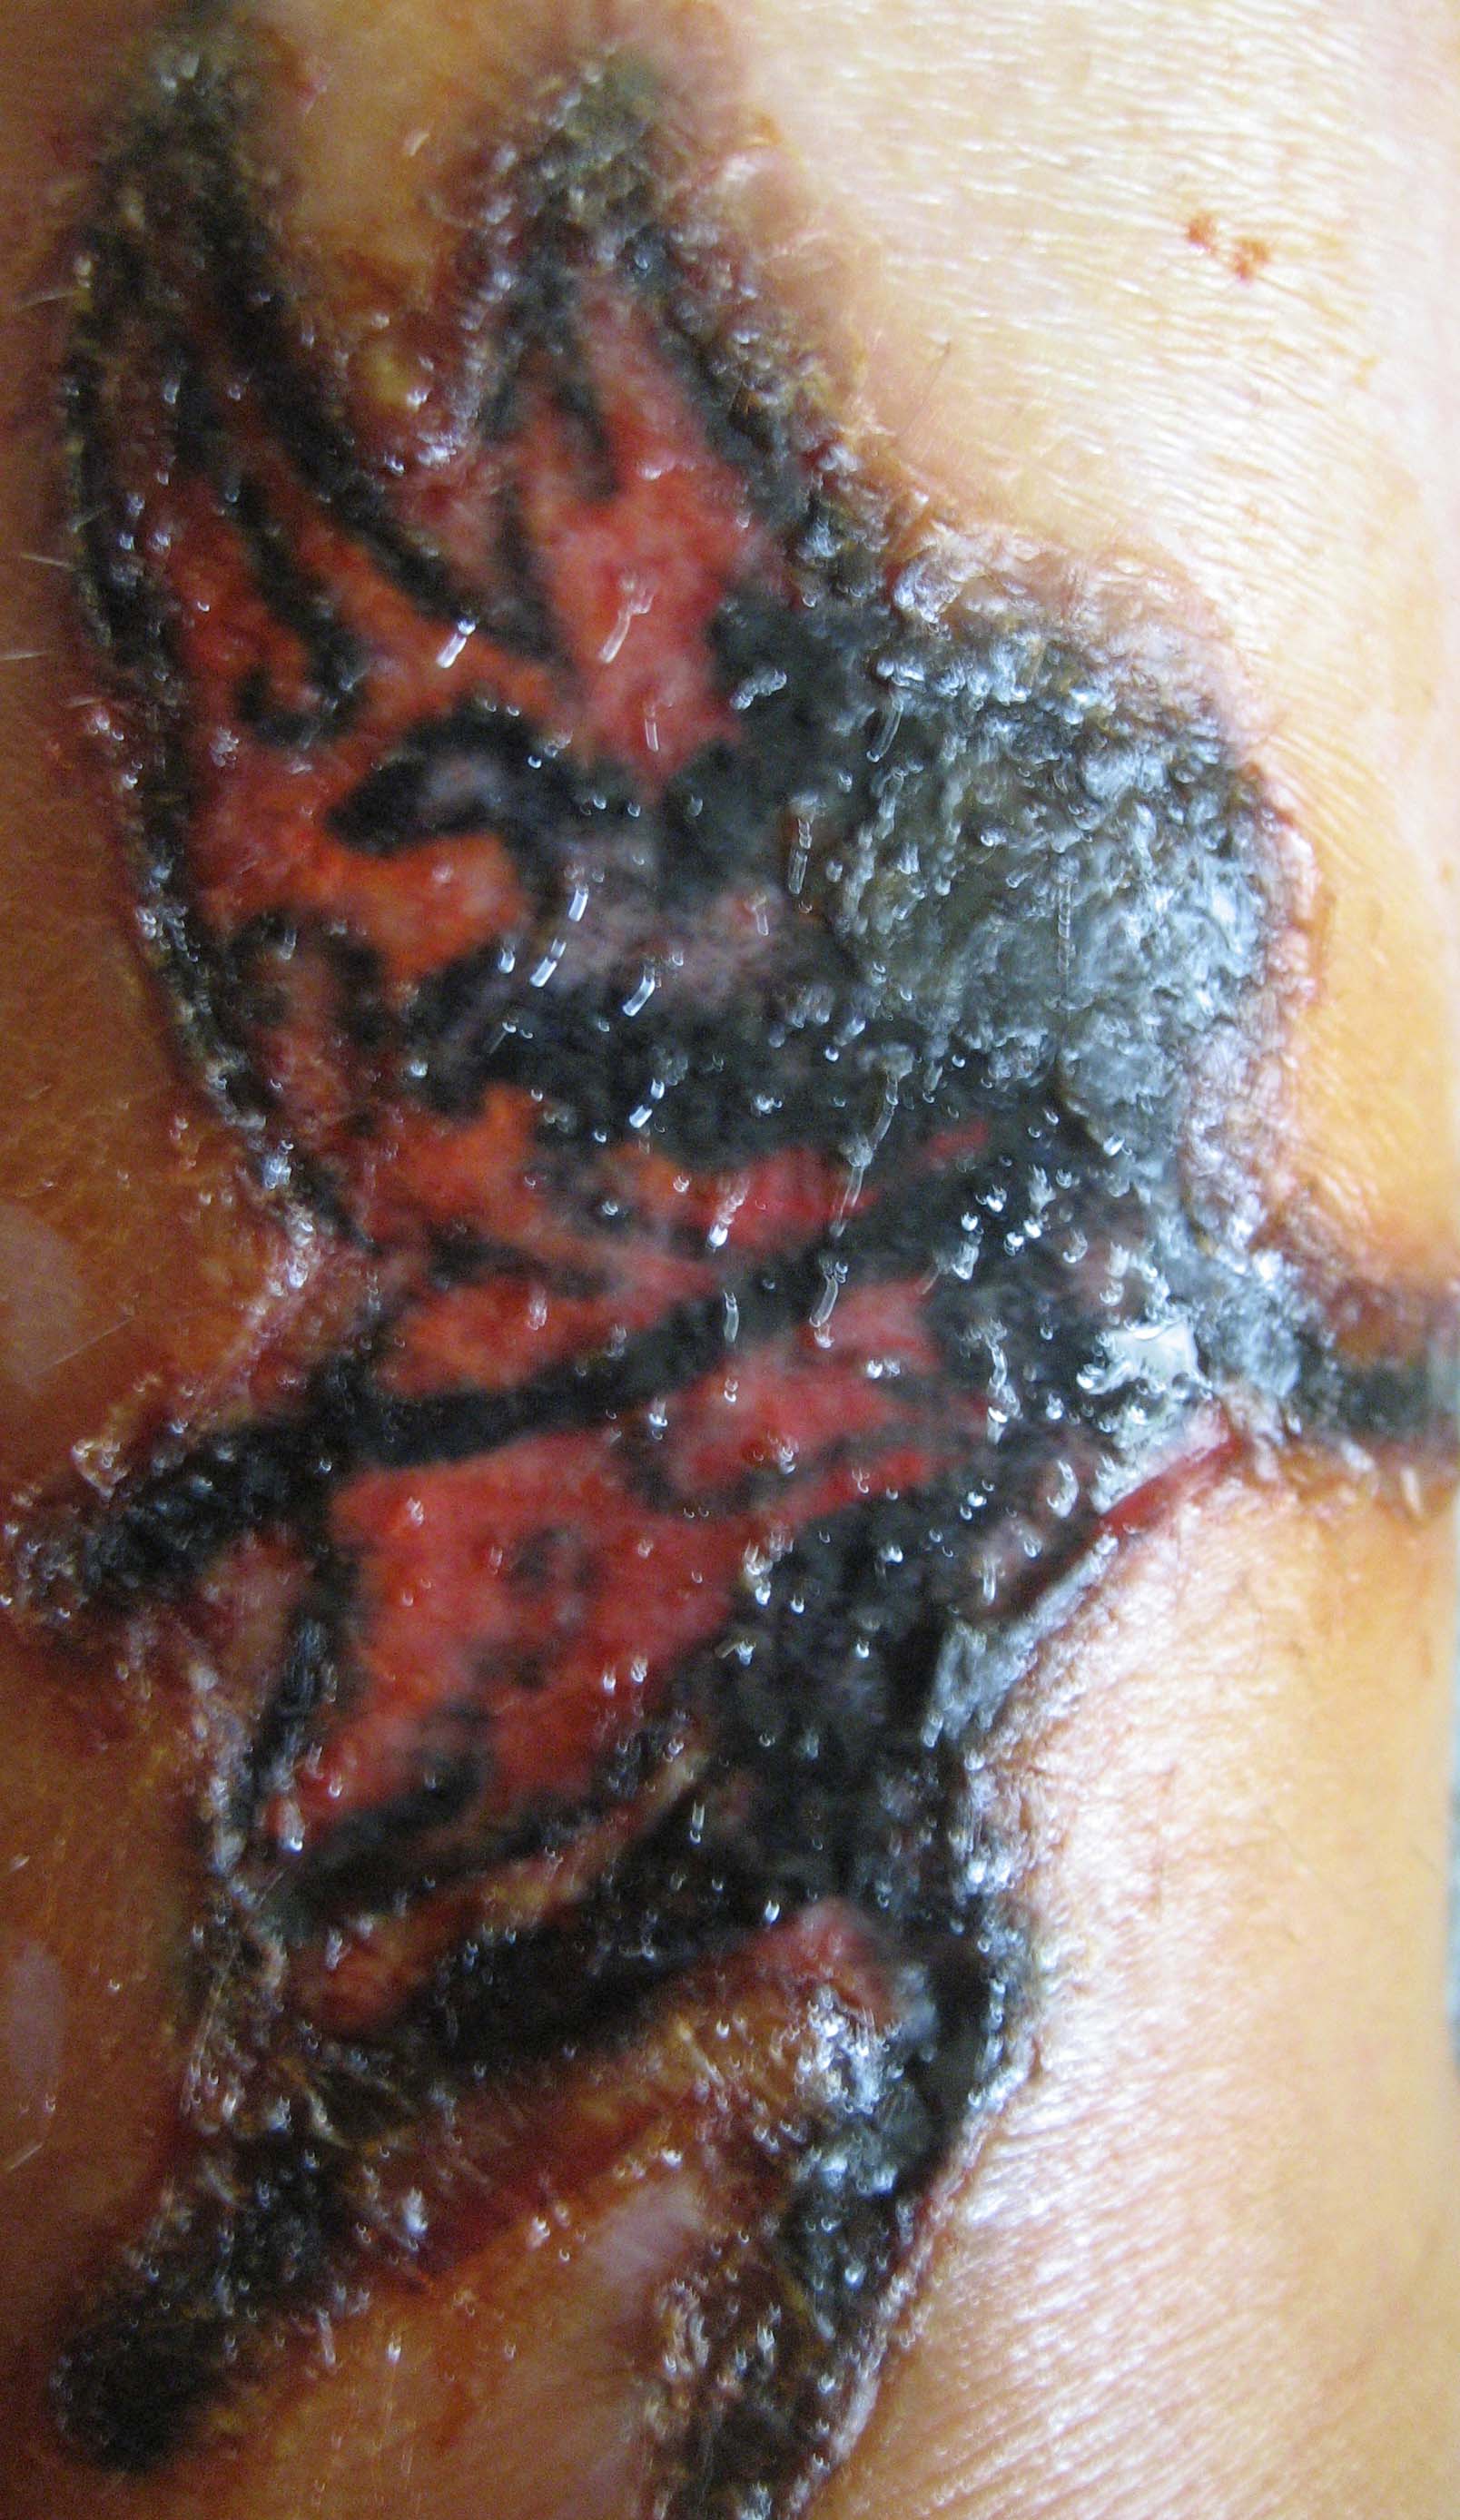 infected scab pictures